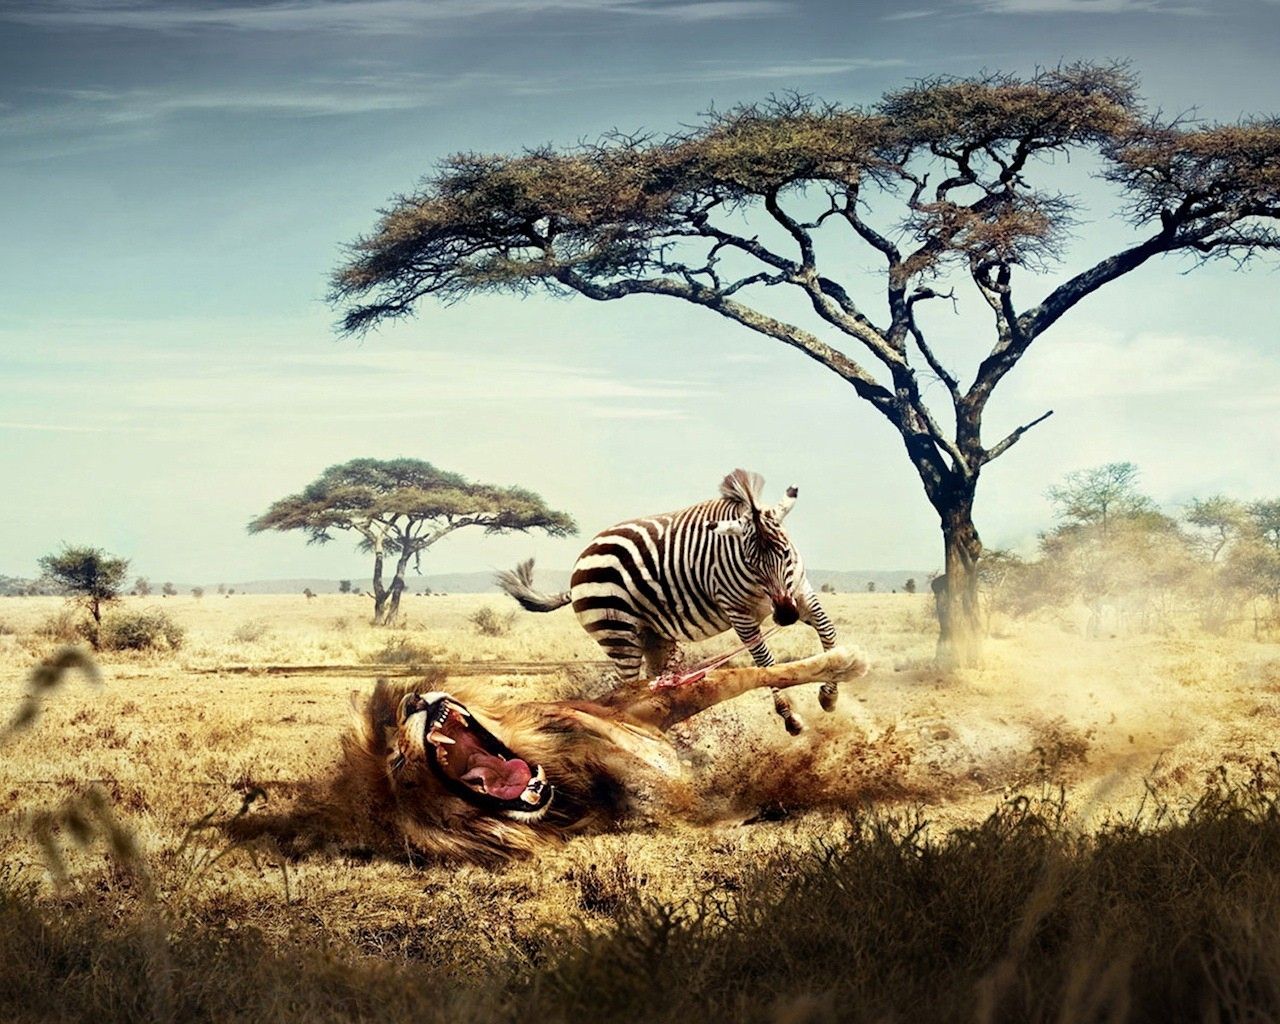 abstract zebras lions hunting 1280x1024 wallpaper High Quality Wallpaper, High Definition Wallpaper